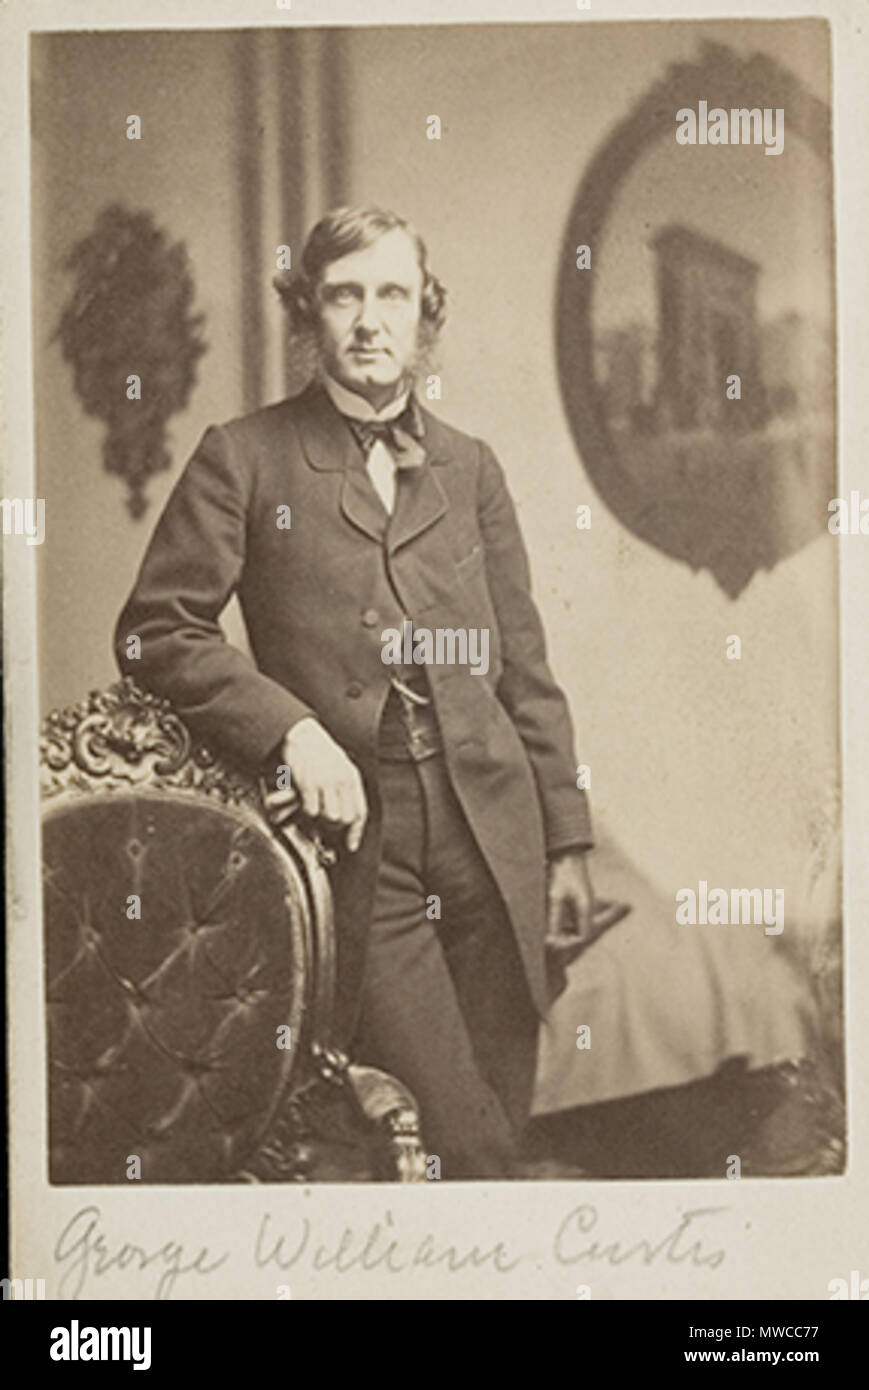 . Title: George William Curtis (1824-1892). Work Type: photograph; carte-de-visite. Creator: Whipple, John Adams (1822 - 1891), American. Date: 1860-1864. Dimensions: sight: 10 x 6 cm (3 15/16 x 2 3/8 in.). Materials/Techniques: Albumen silver print on card. Repository: Harvard Art Museum. between 1860 and 1864. John A. Whipple 240 GeorgeWilliamCurtis 1860s byJAWhipple Harvard Stock Photo